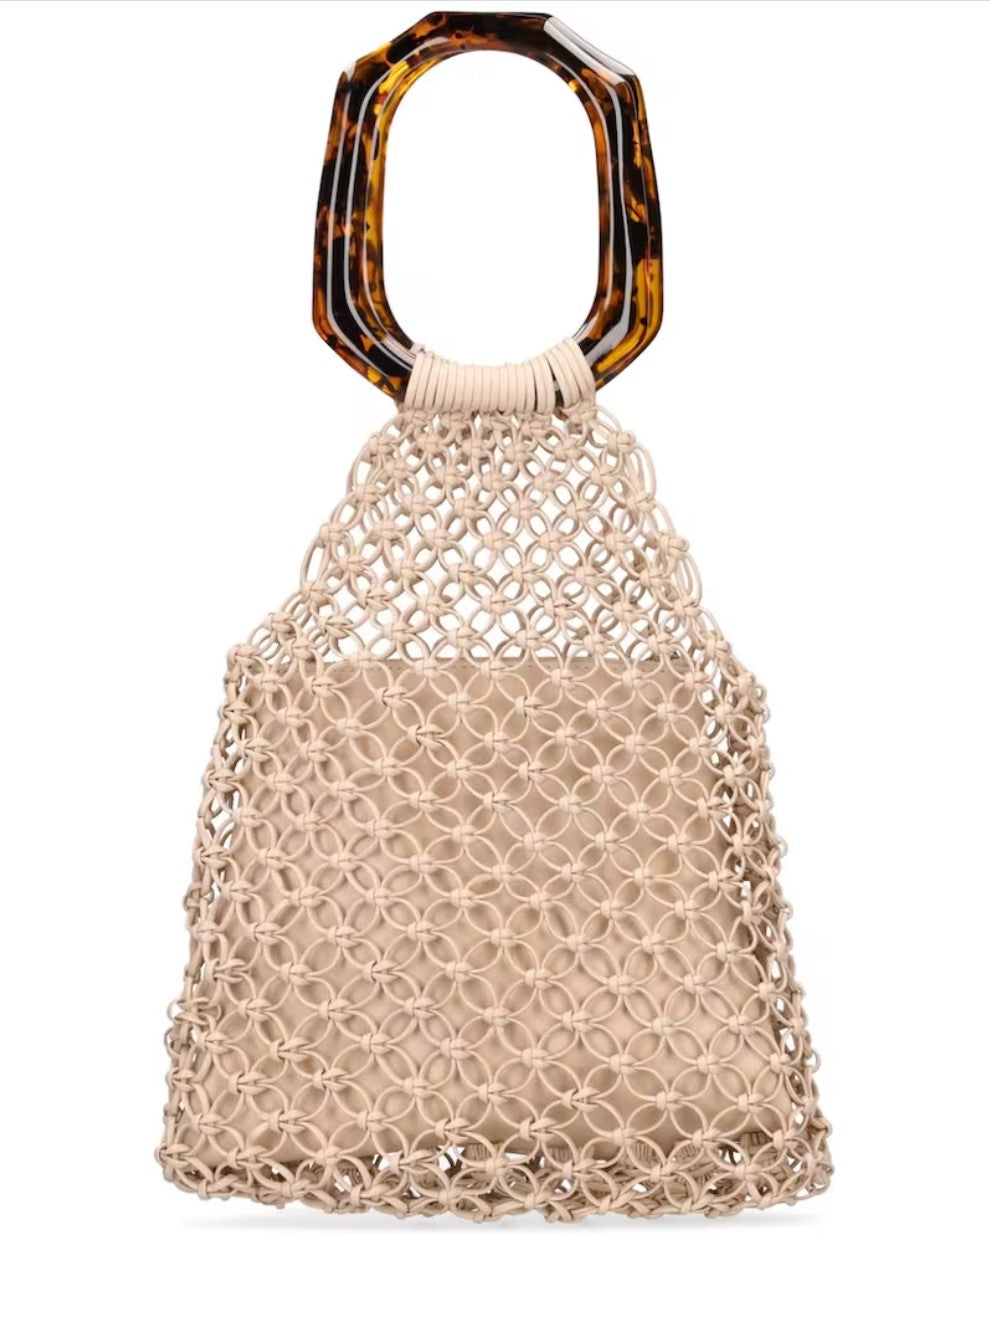 MYLA FRAME HANDLE LARGE LEATHER NET TOTE - AMBER